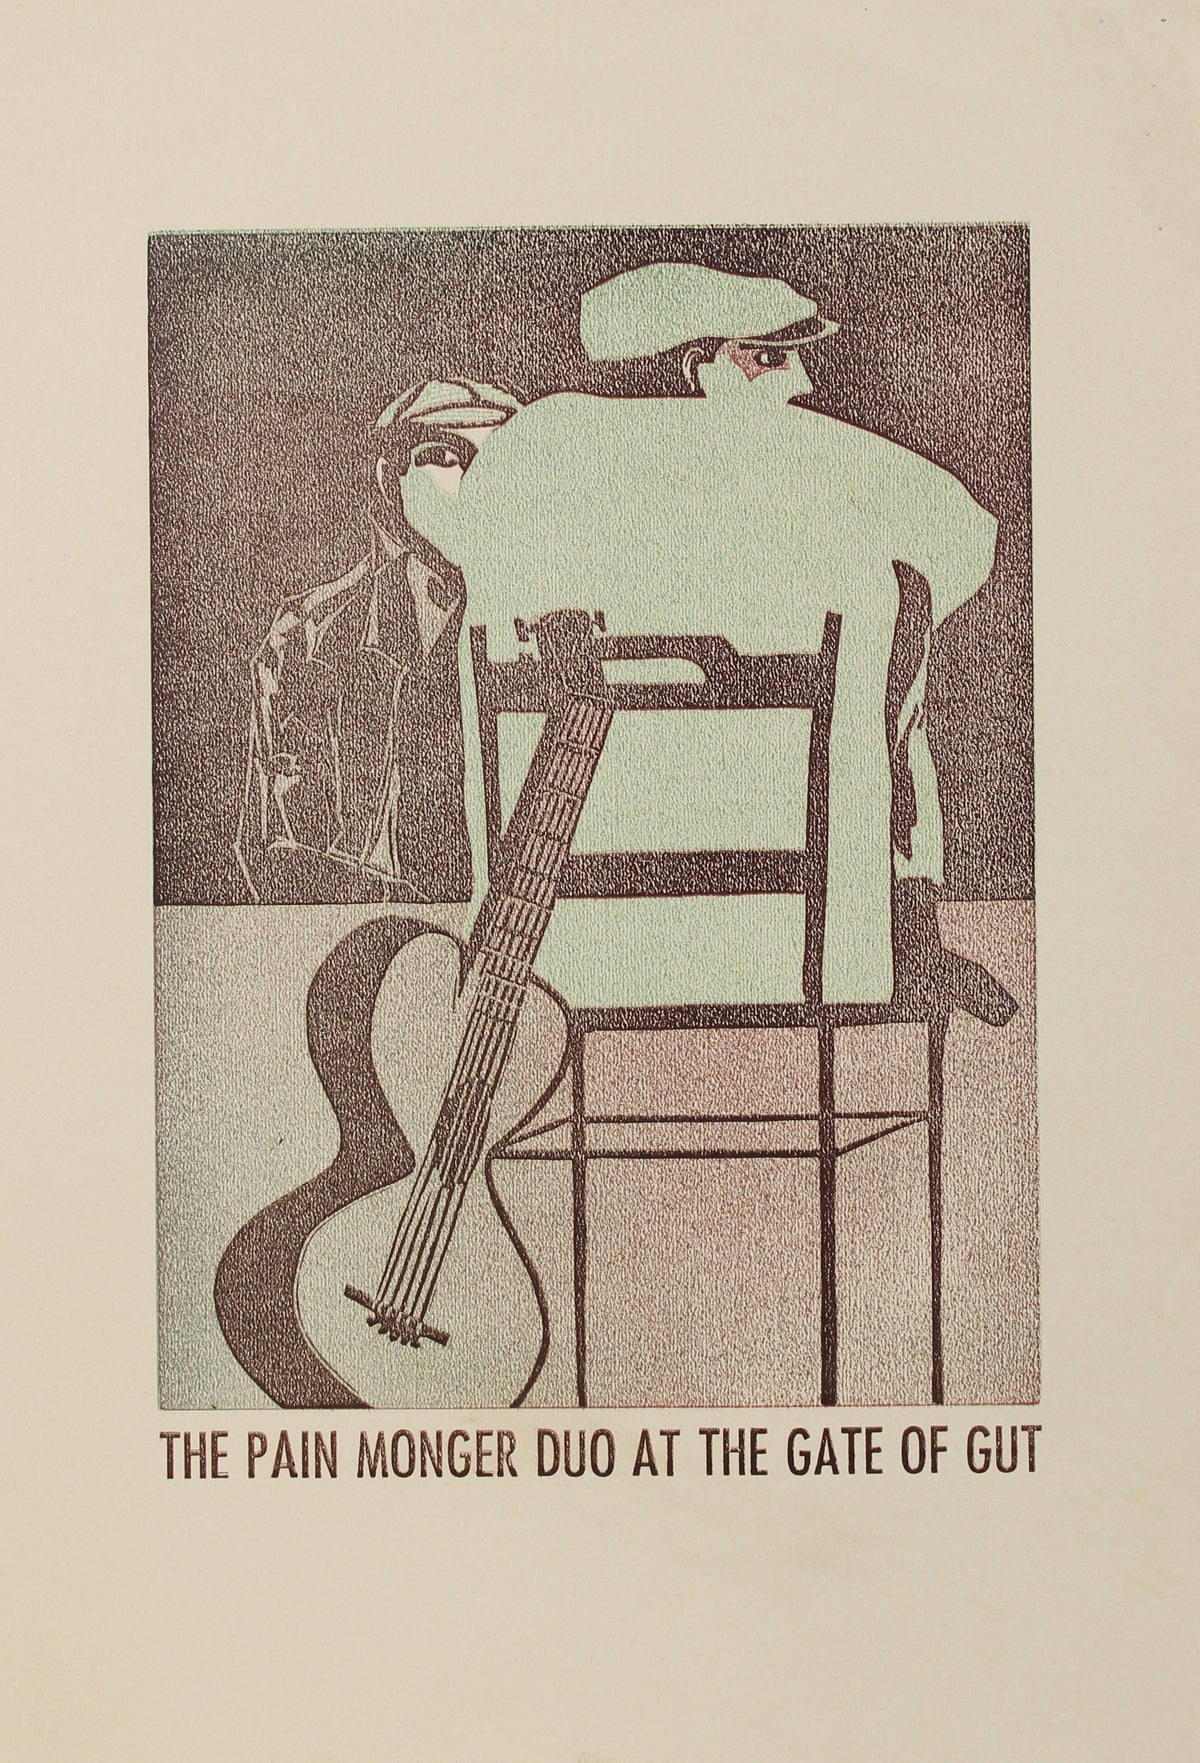 &lt;i&gt;The Pain Monger Duo at the Gate of Gut&lt;/i&gt;&lt;br&gt;1960-70s Serigraph&lt;br&gt;&lt;br&gt;#A0436